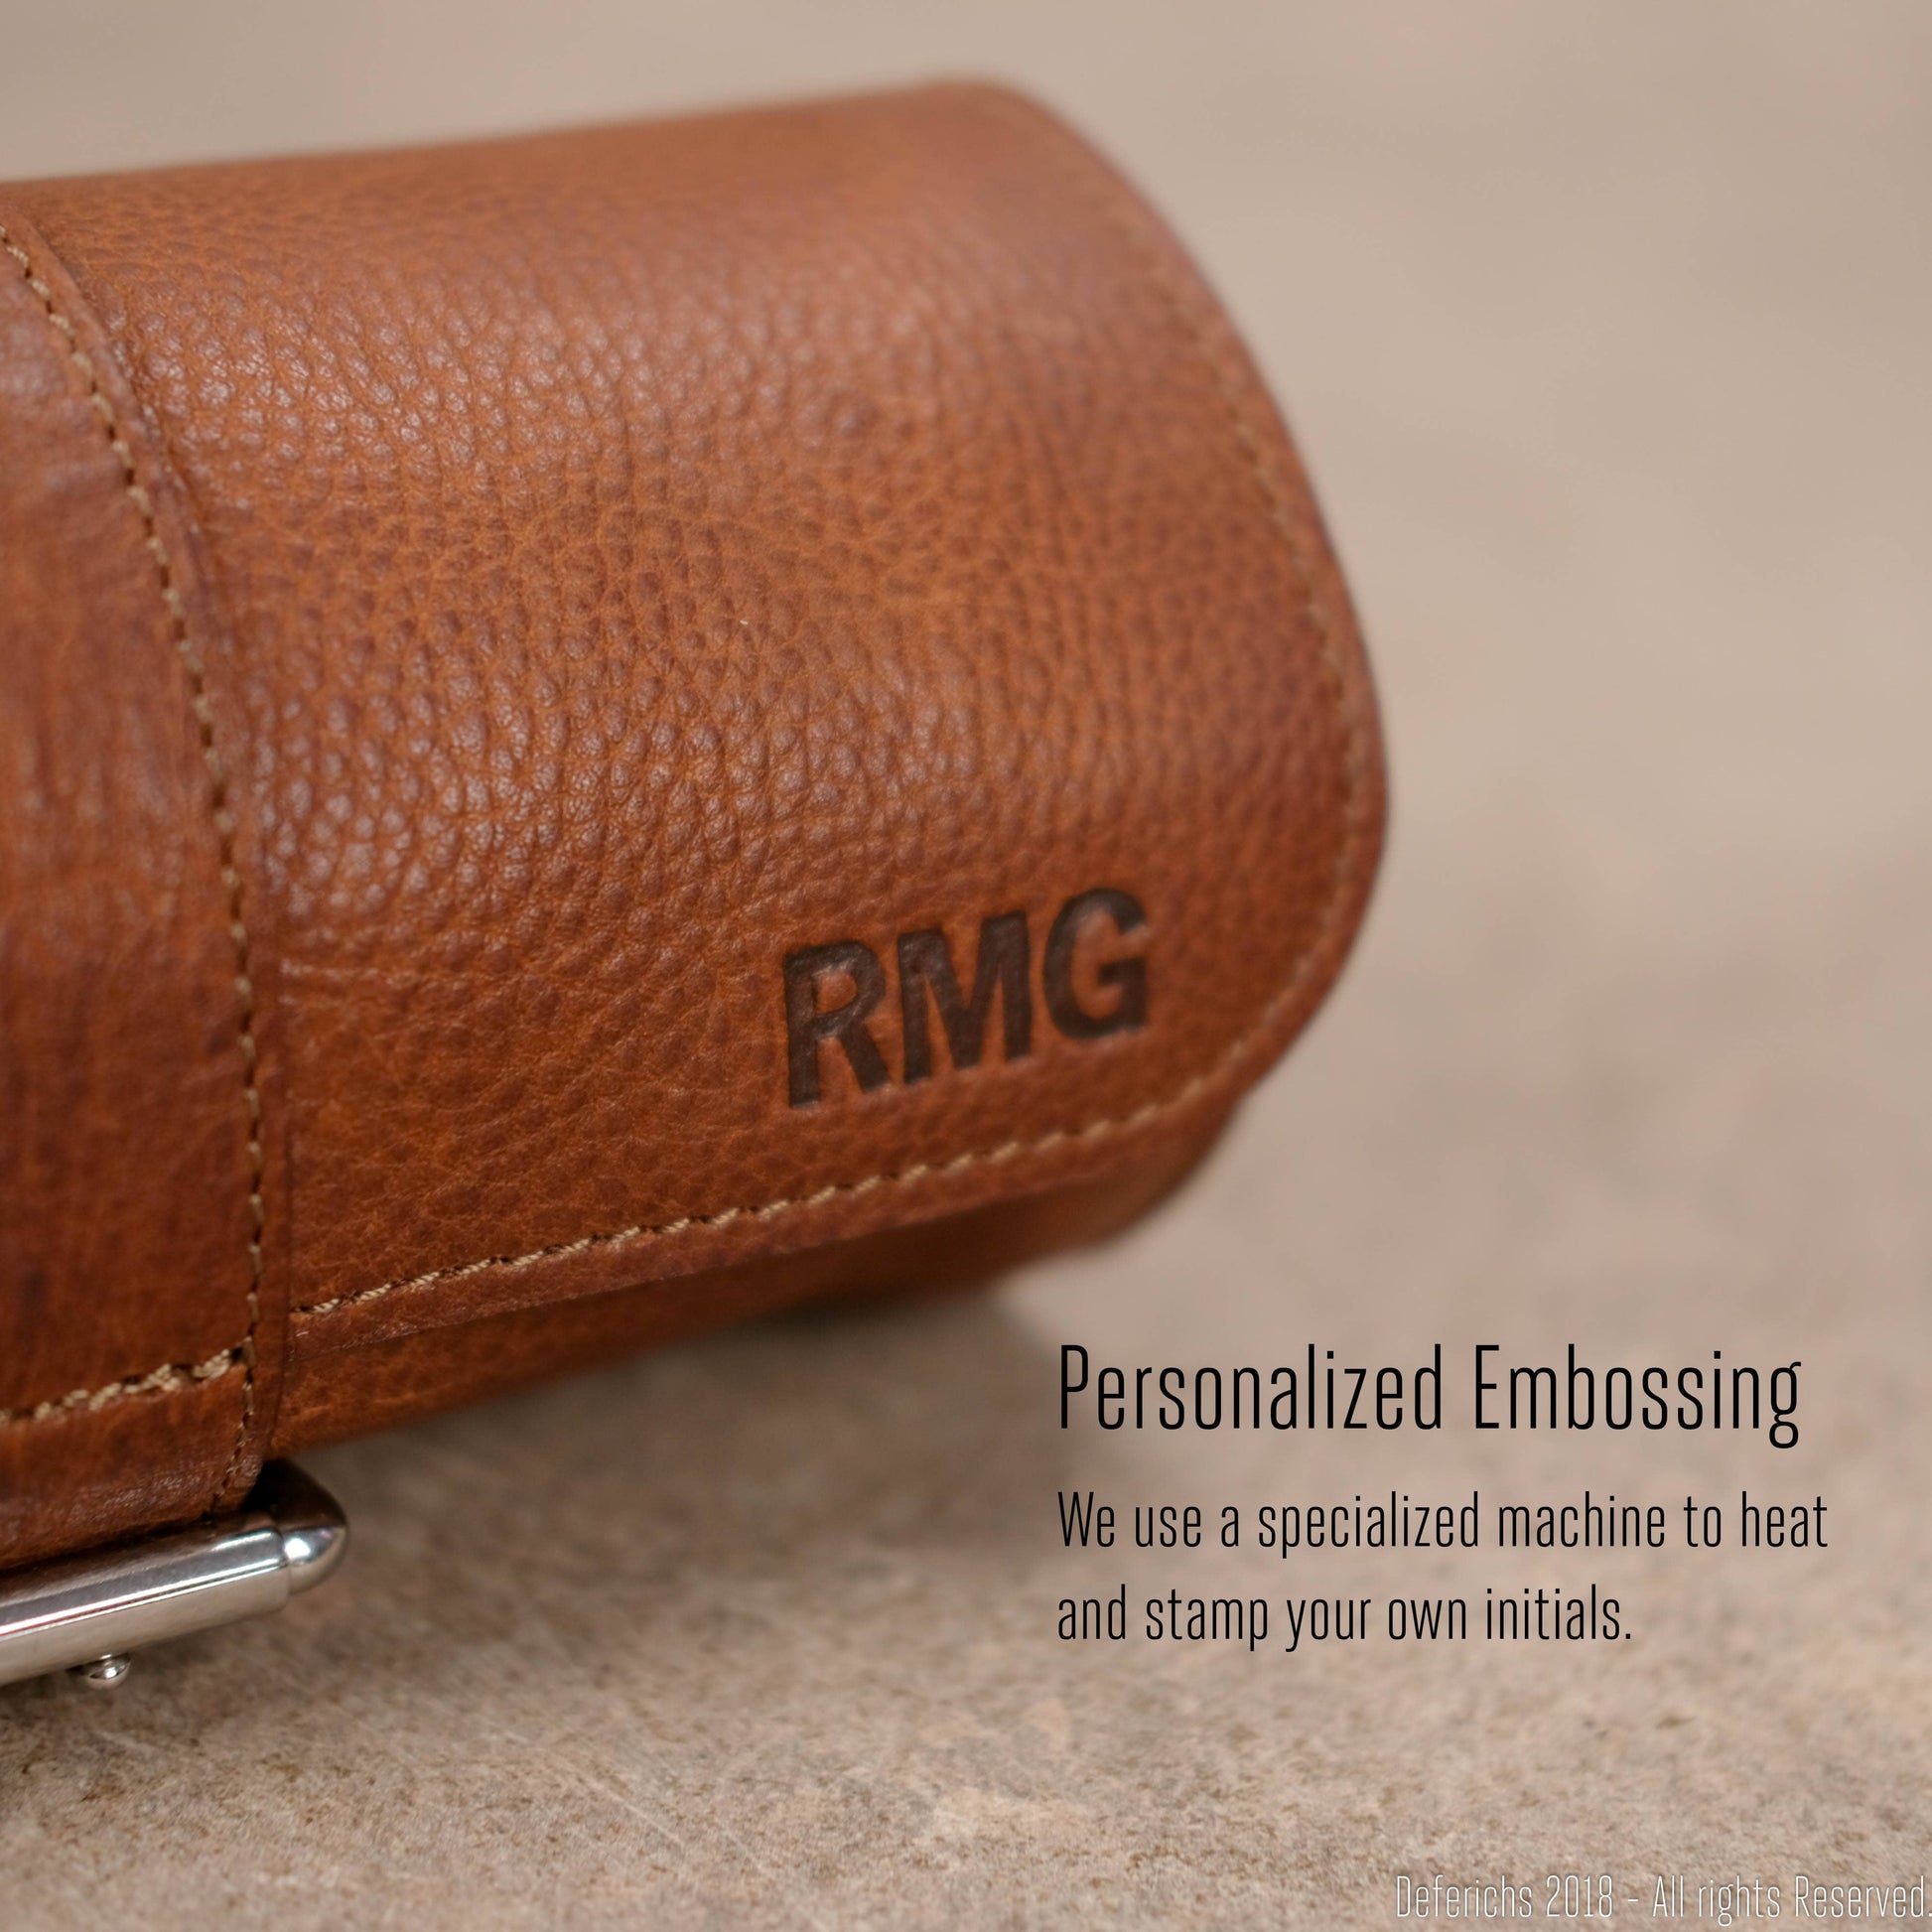 Leather Watch Case Roll for Travel. - Deferichs